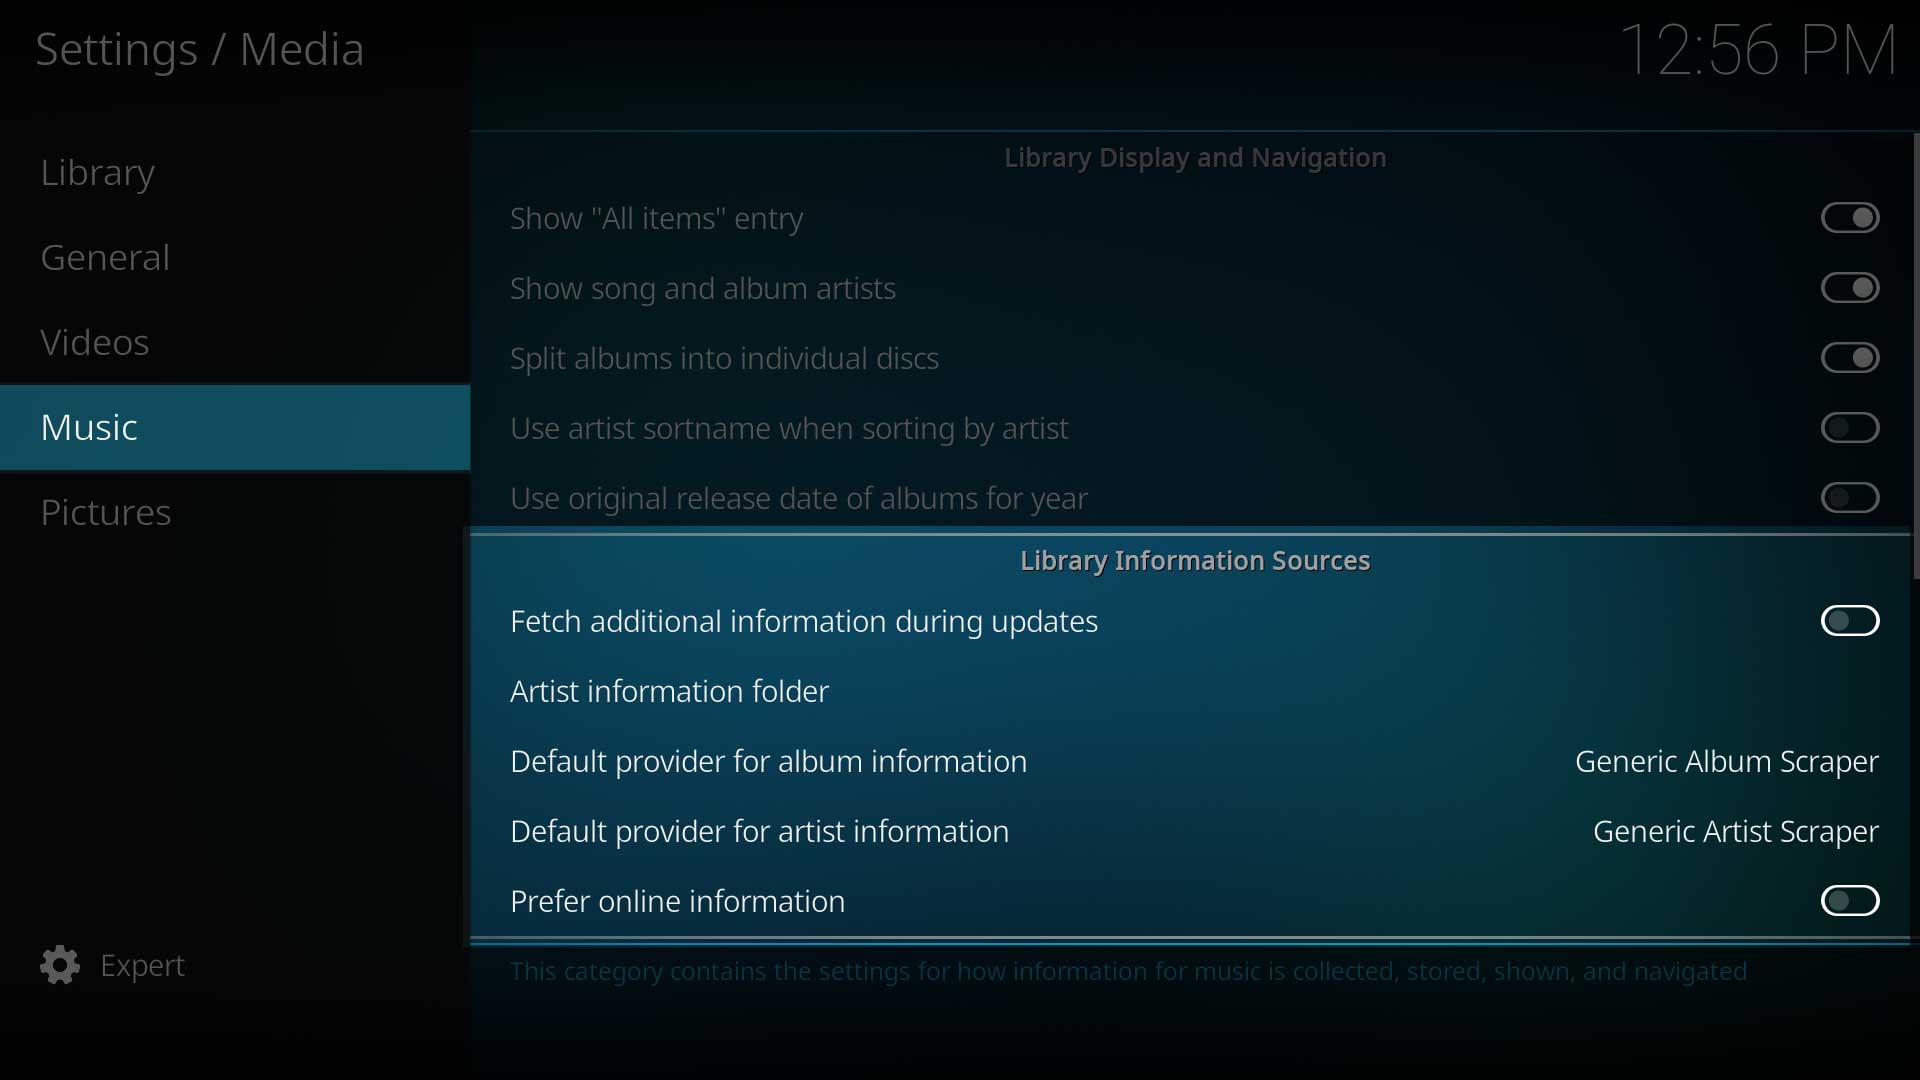 Step 1 - Change album and artist scrapers through the Kodi System Settings using Default provider for album information and Default provider for artist information